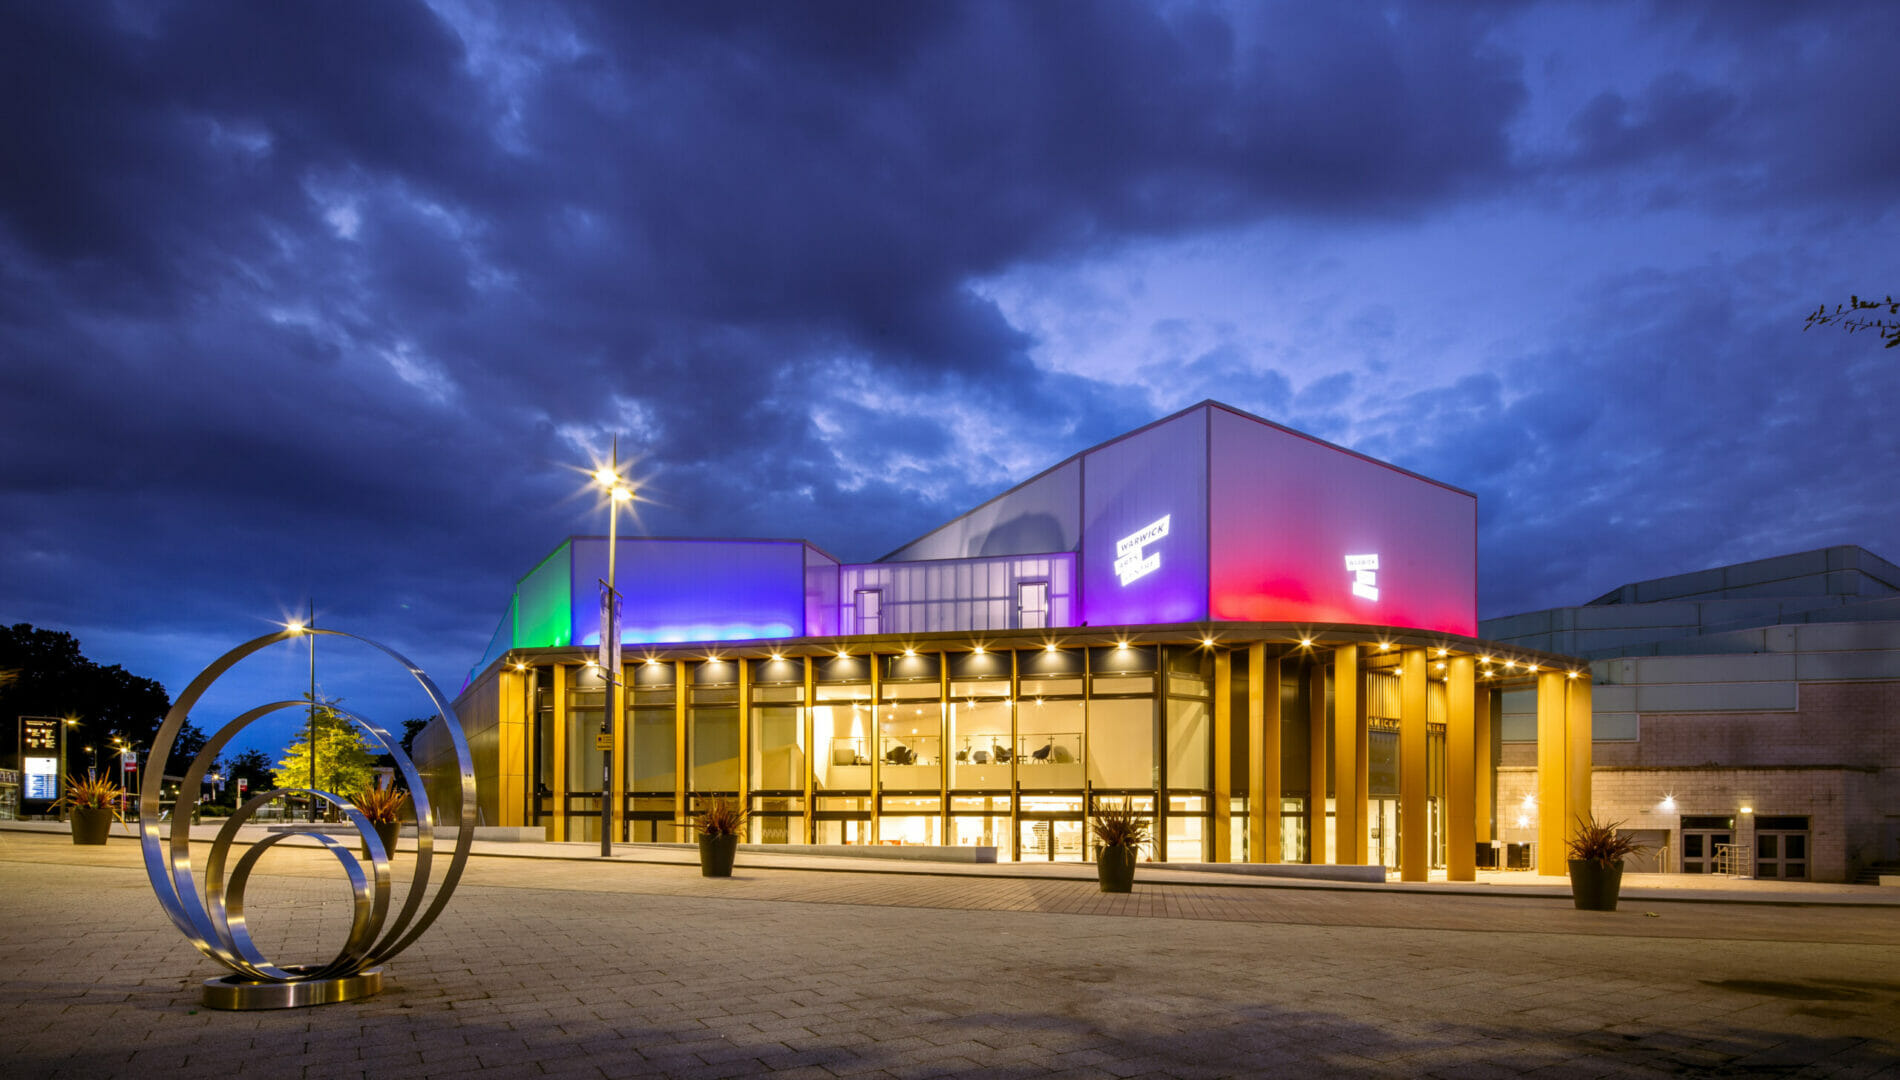 WARWICK ARTS CENTRE – WATERLOO AIR PRODUCTS CASE STUDY